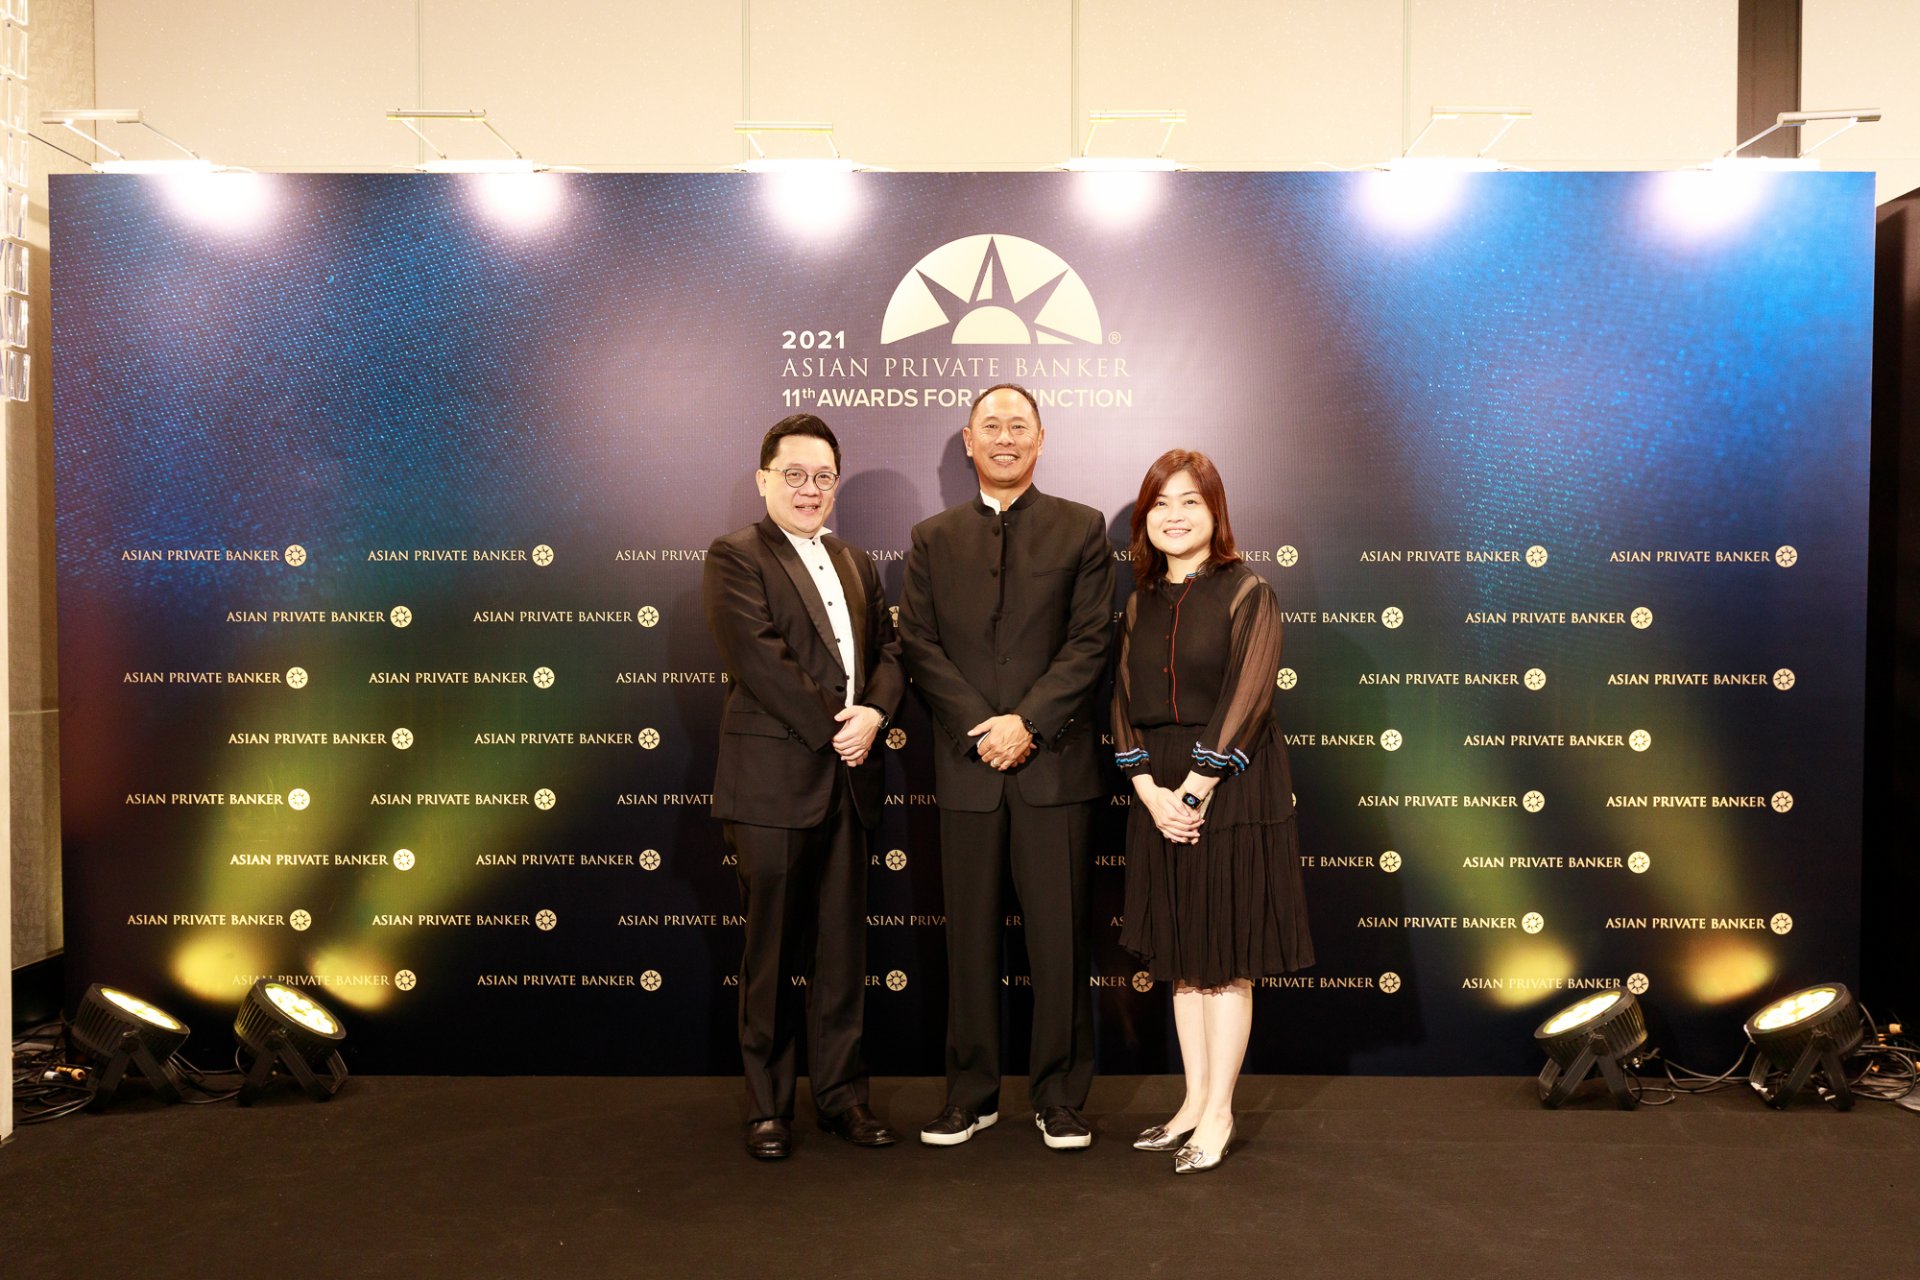 Carret Private wins Best Independent Wealth Manager – DPM and Best Independent Wealth Manager – Asia Pacific for 2021